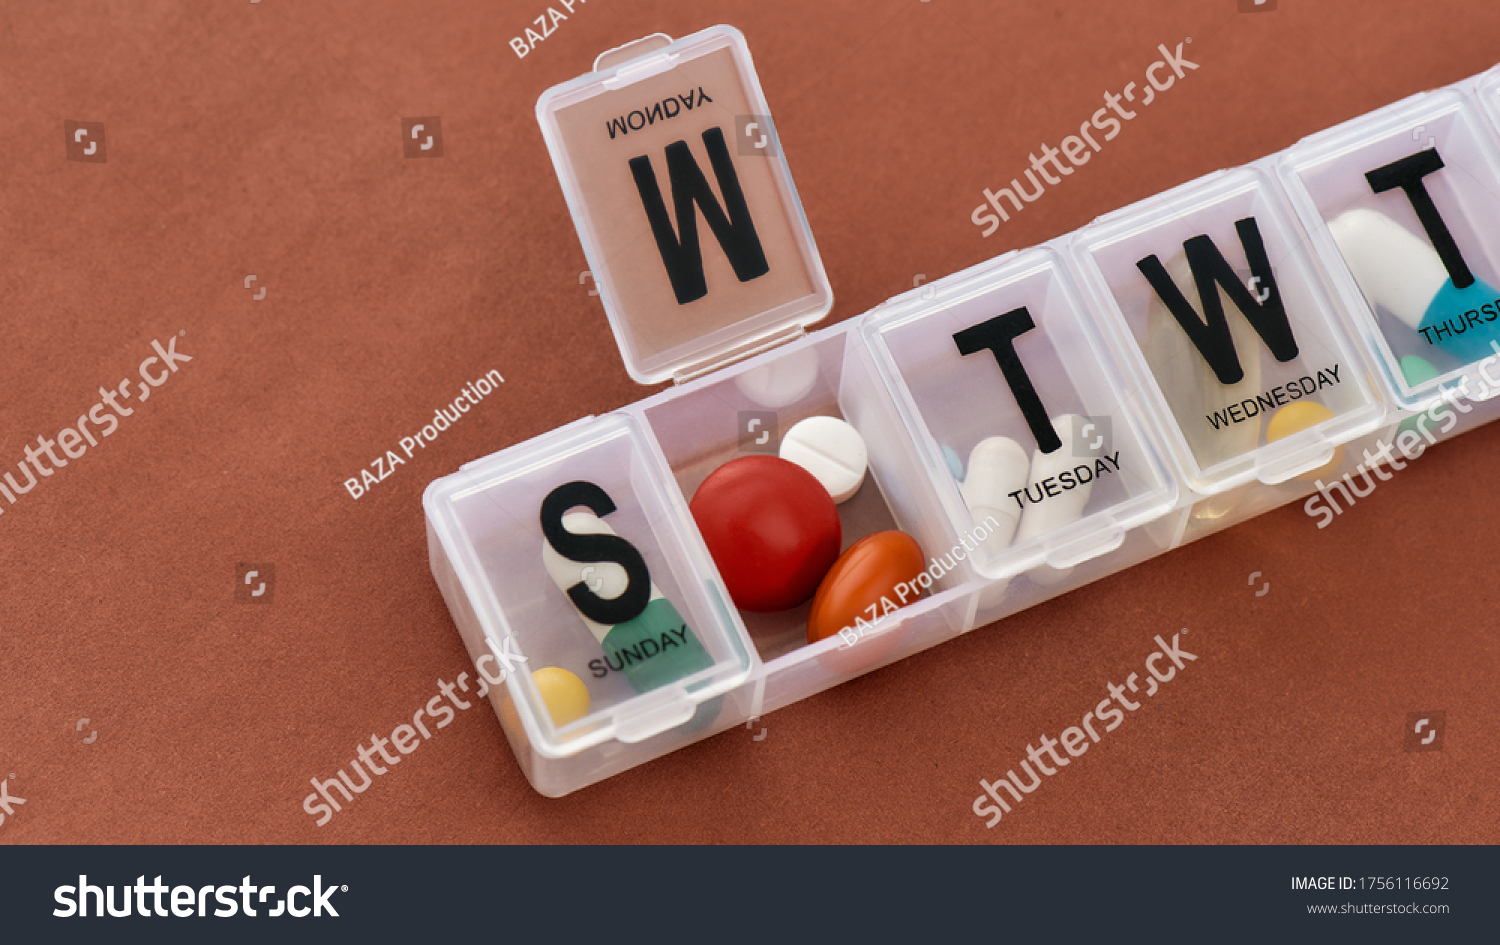 A weekly medicine dispenser opened for Monday, prescription pills and vitamins in a white pill box on terracotta background. Health care, vitamins and treatment concept. Horizontal shot #1756116692